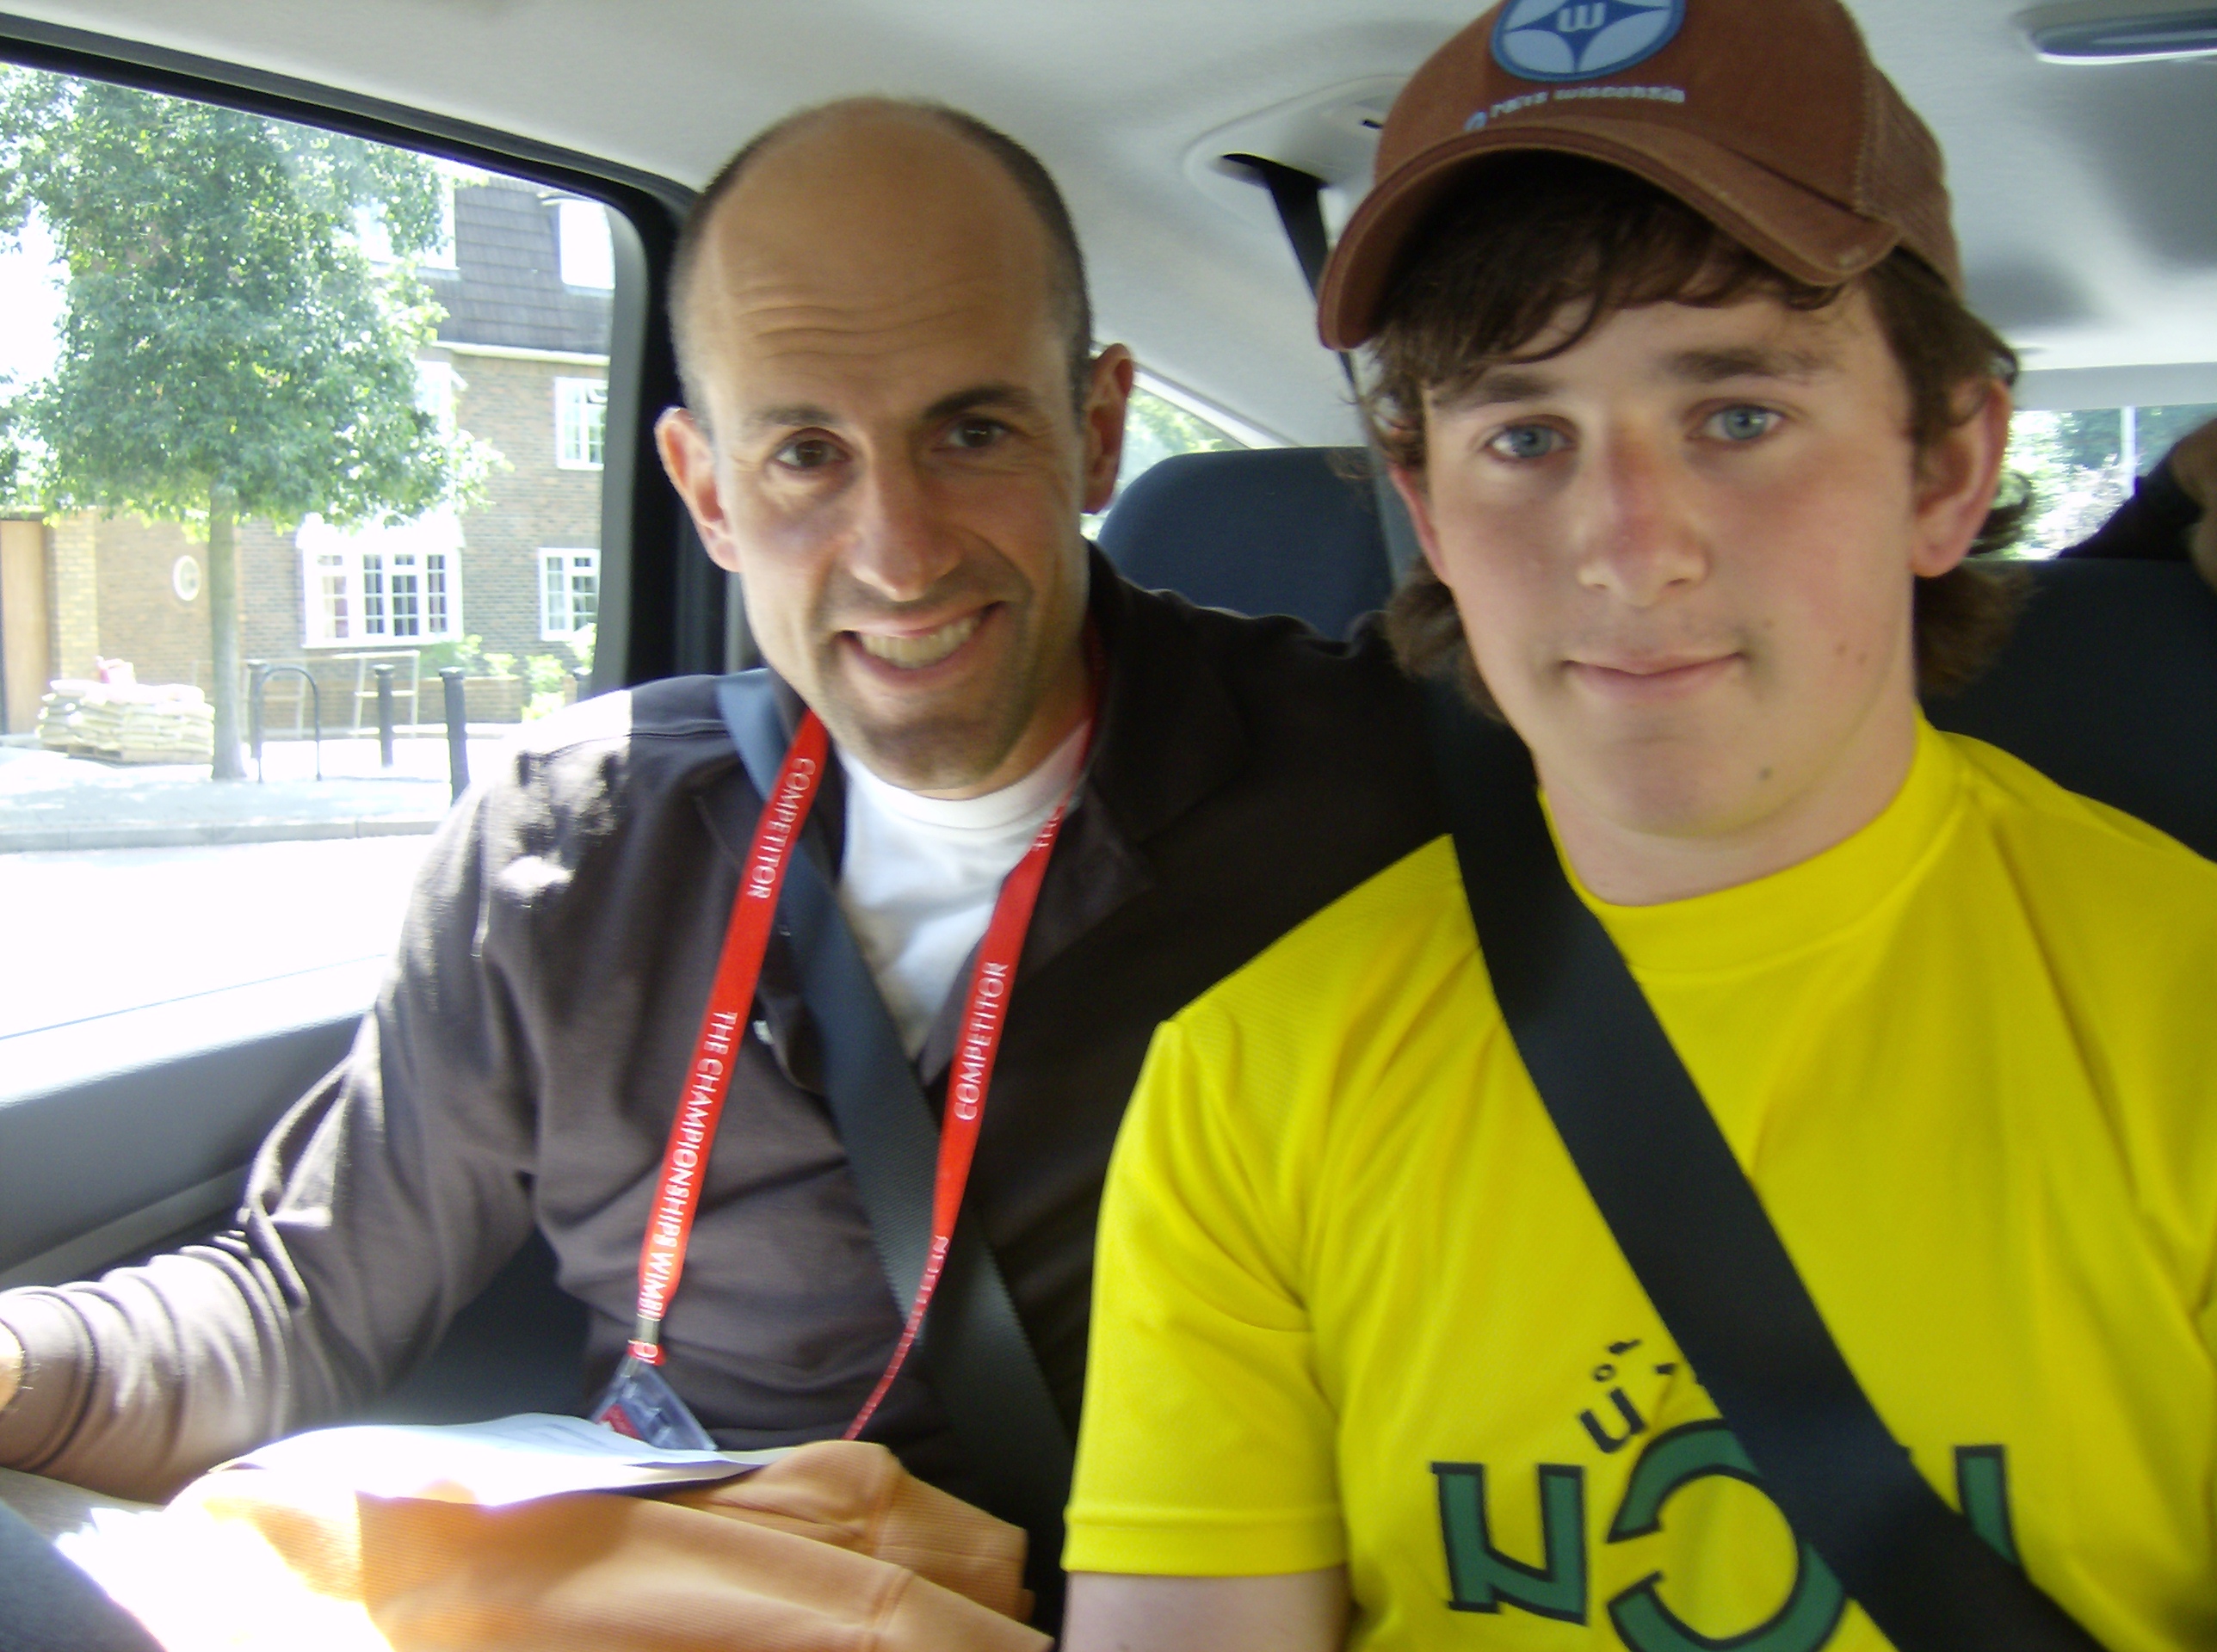 Jim and I on the way to Wimbledon in 2008 (28/6).